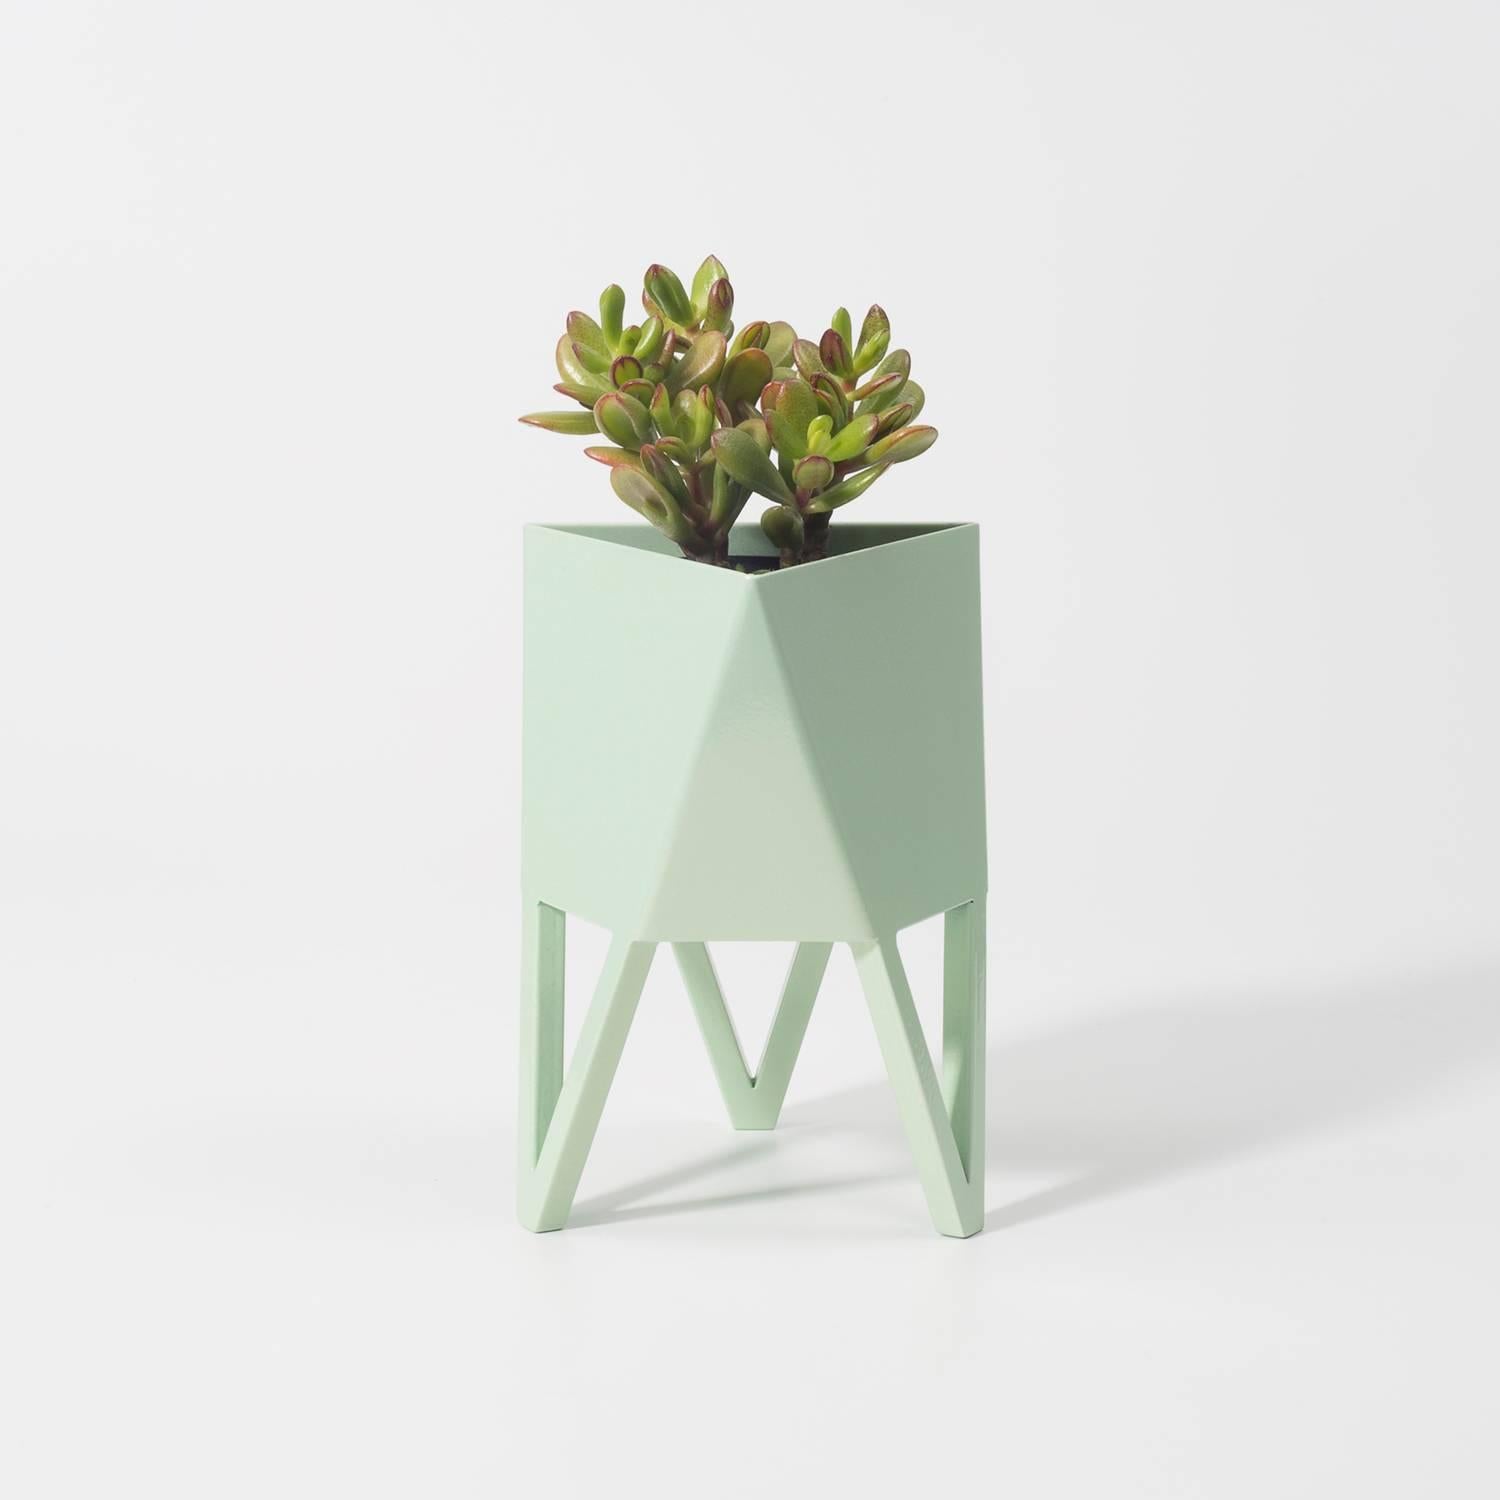 Deca Planter in Glossy White Steel, Medium, by Force/Collide 6